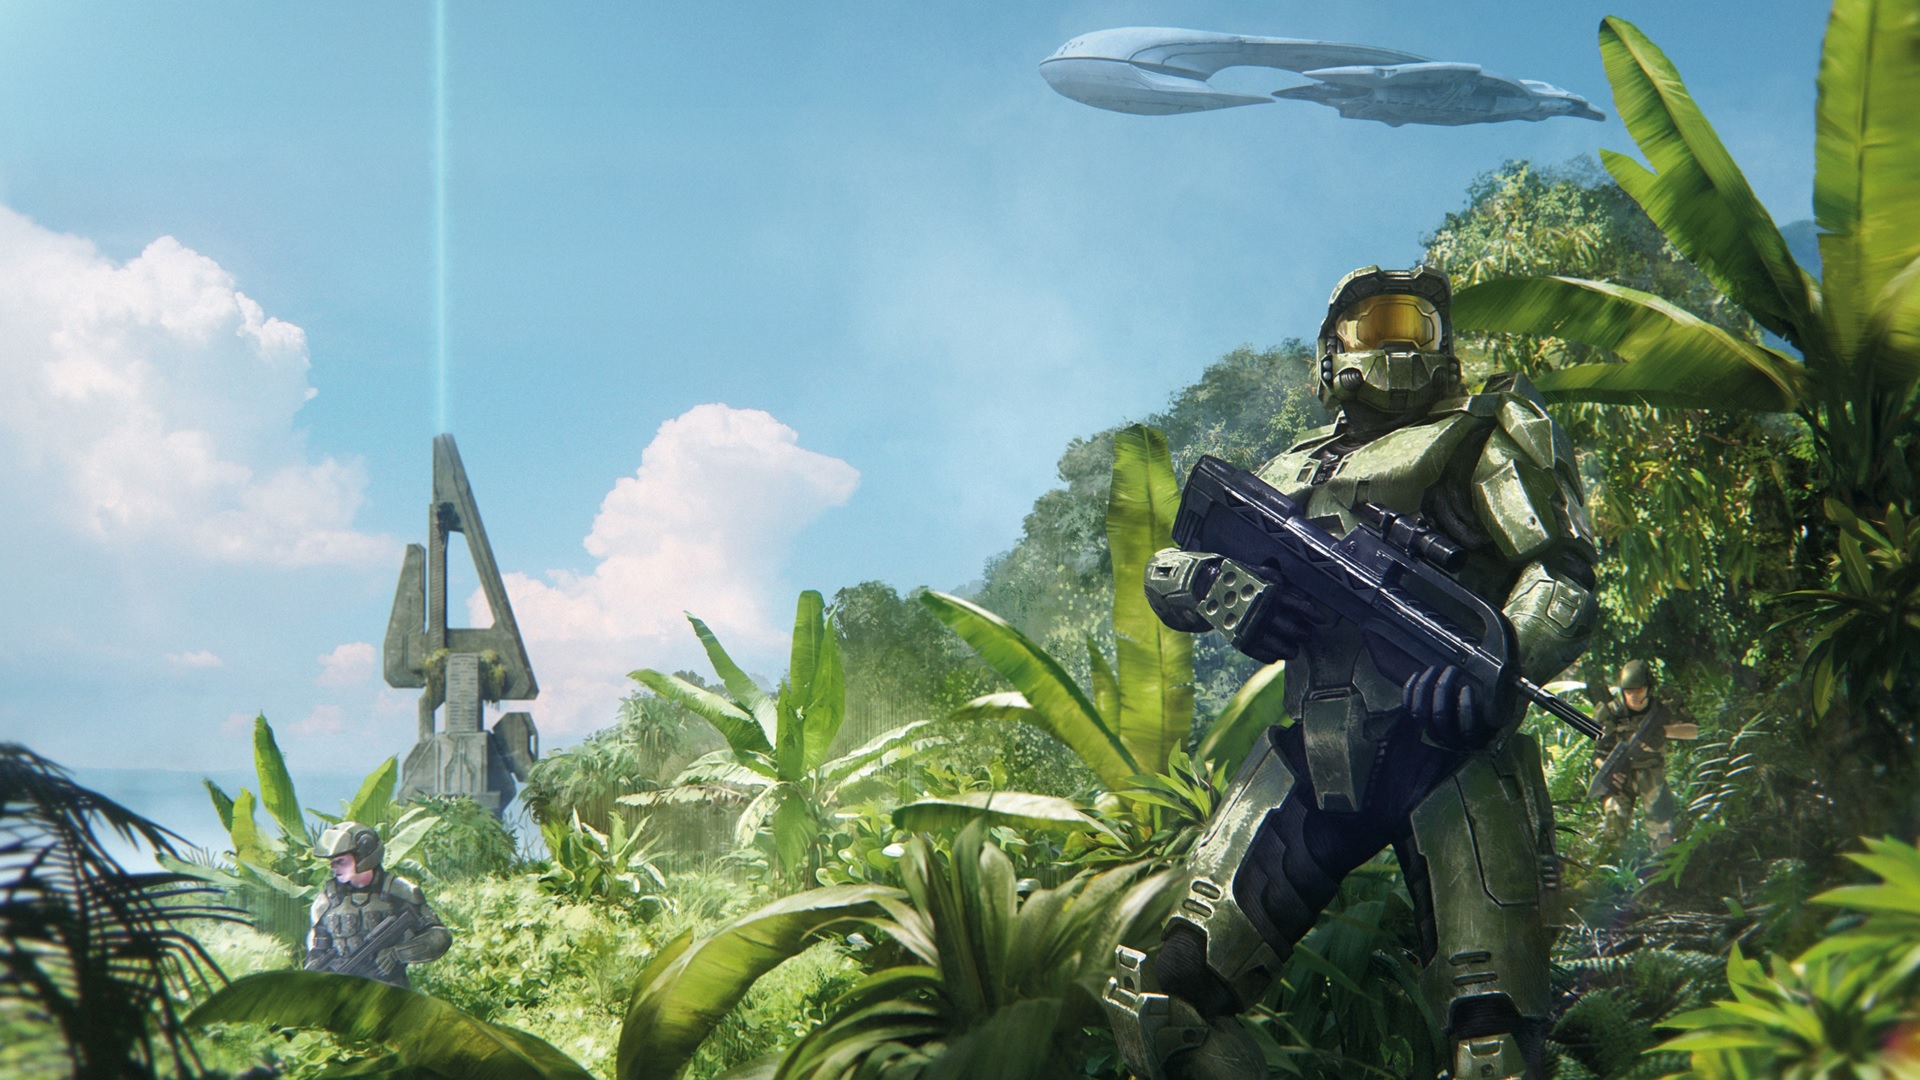 Header image for the October Community Update showing the master Chief on Delta Halo